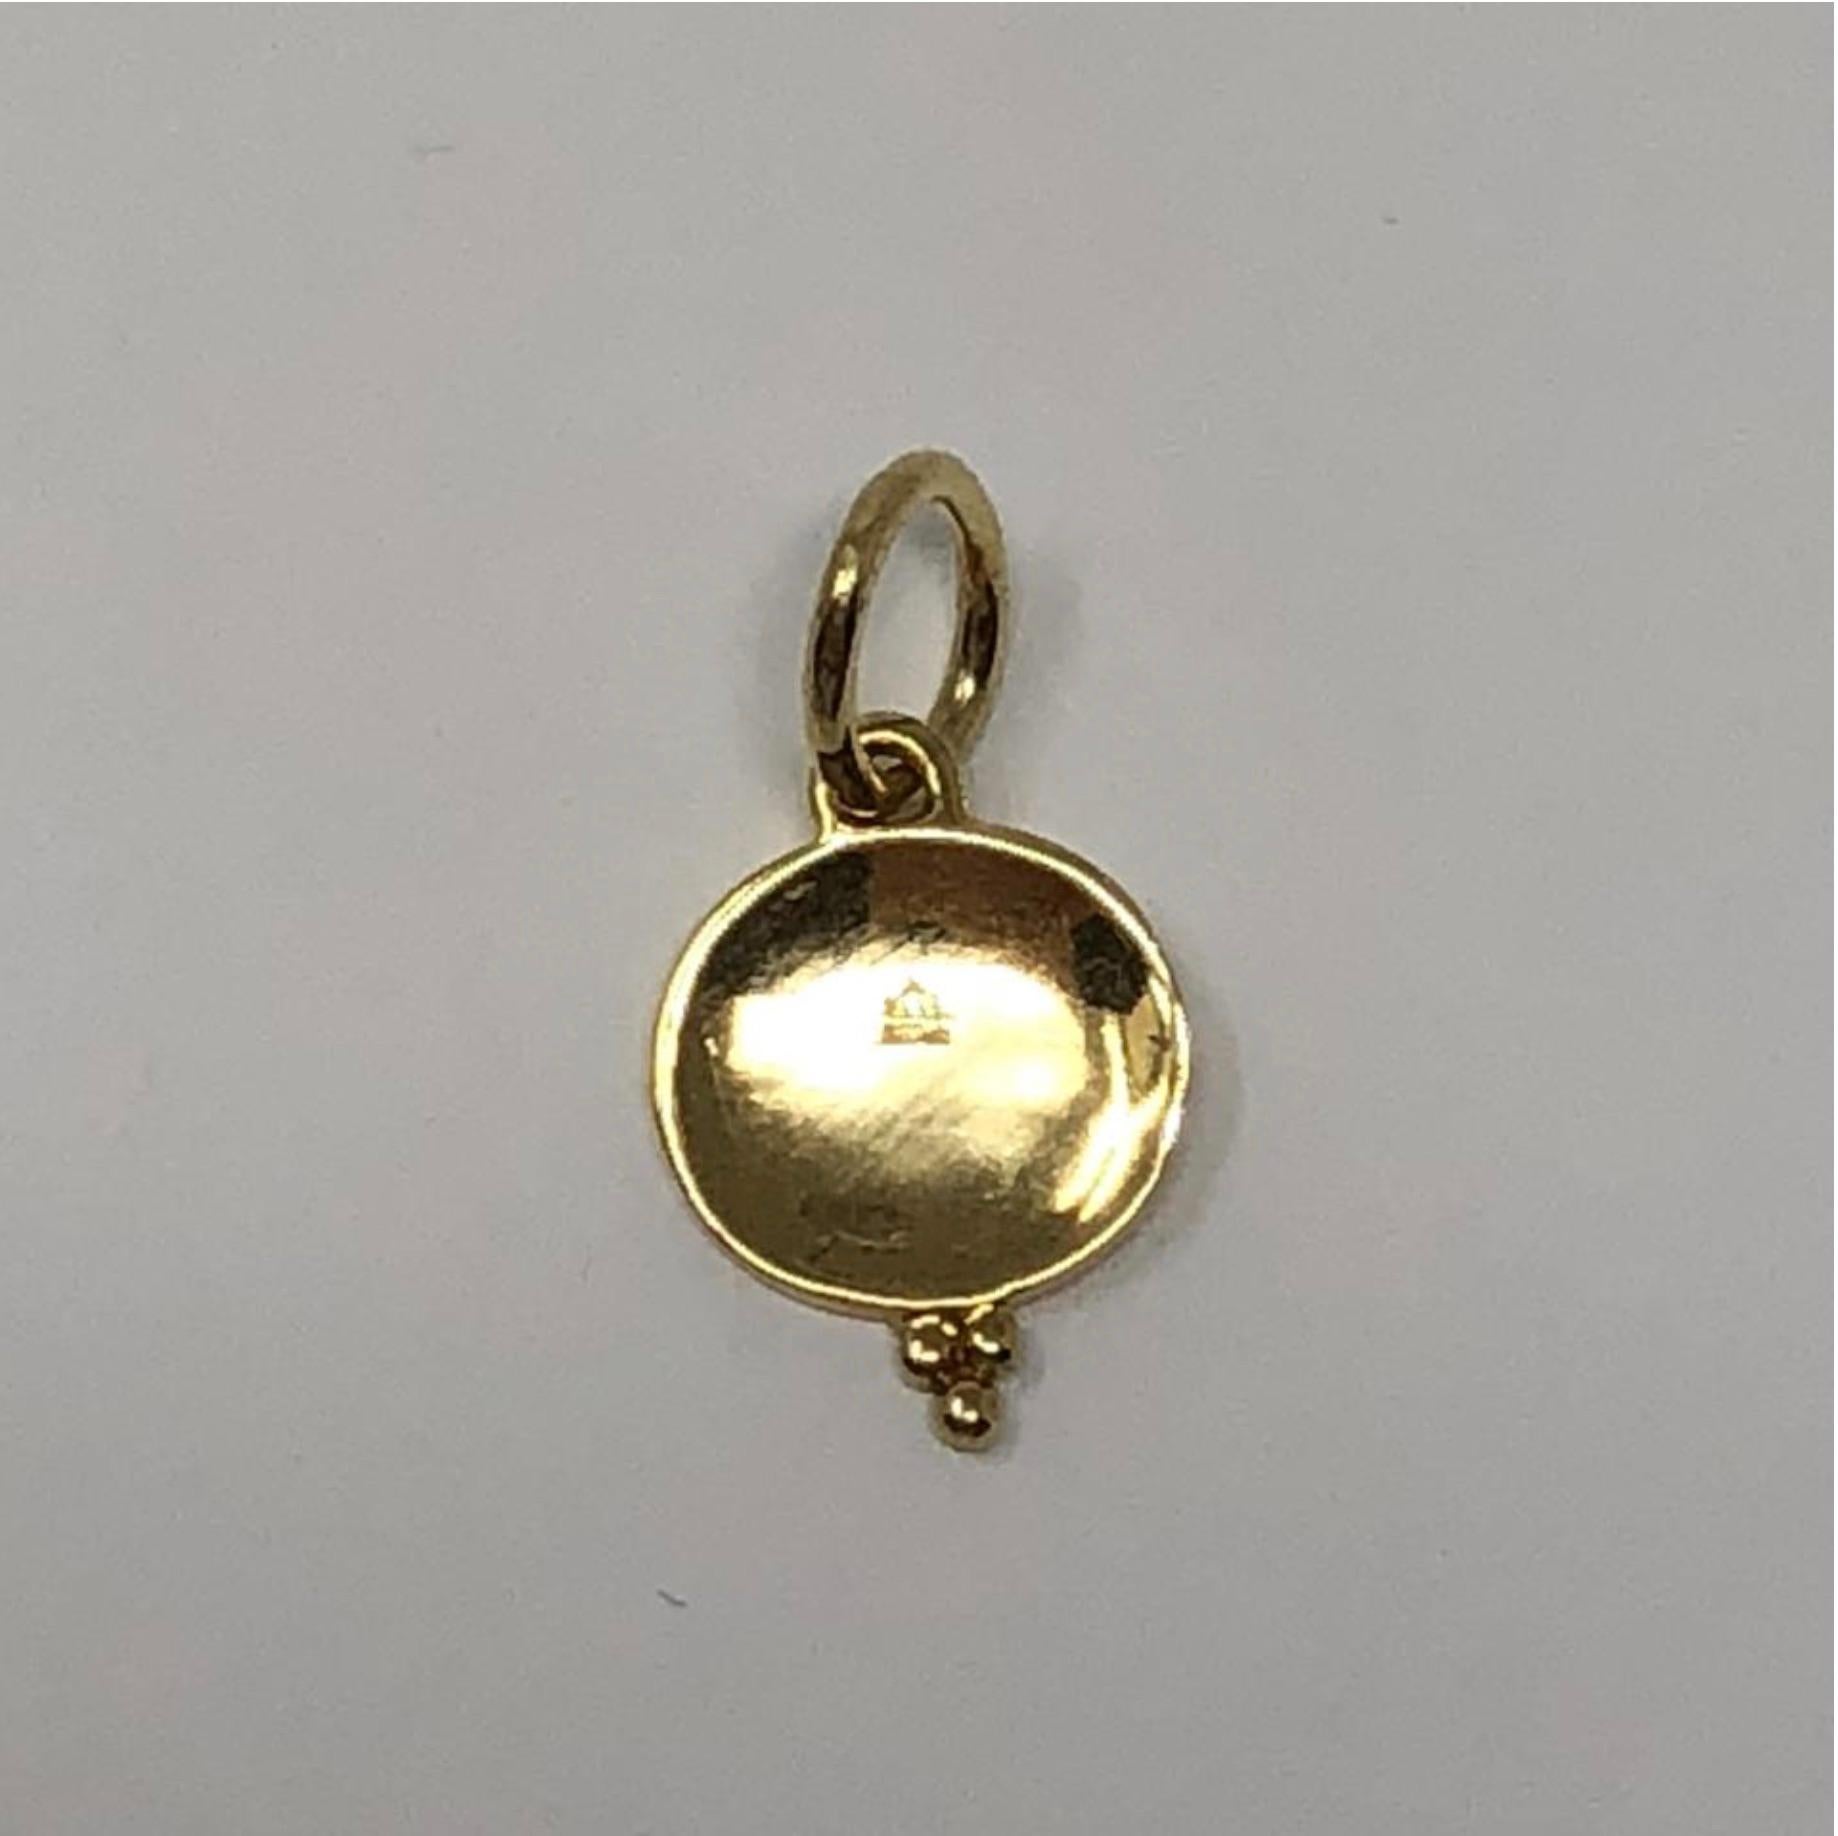 MODEL - Temple St Clair 18k Charm - Sorcer

CONDITION - Exceptional! No signs of wear.

SKU - 2320

ORIGINAL RETAIL PRICE - 495 + tax

MATERIAL - 18k Gold

WEIGHT - 1.45 grams

DIMENSIONS - L11mm x H15mm (21mm with Jump Ring) x D1mm

COMES WITH -